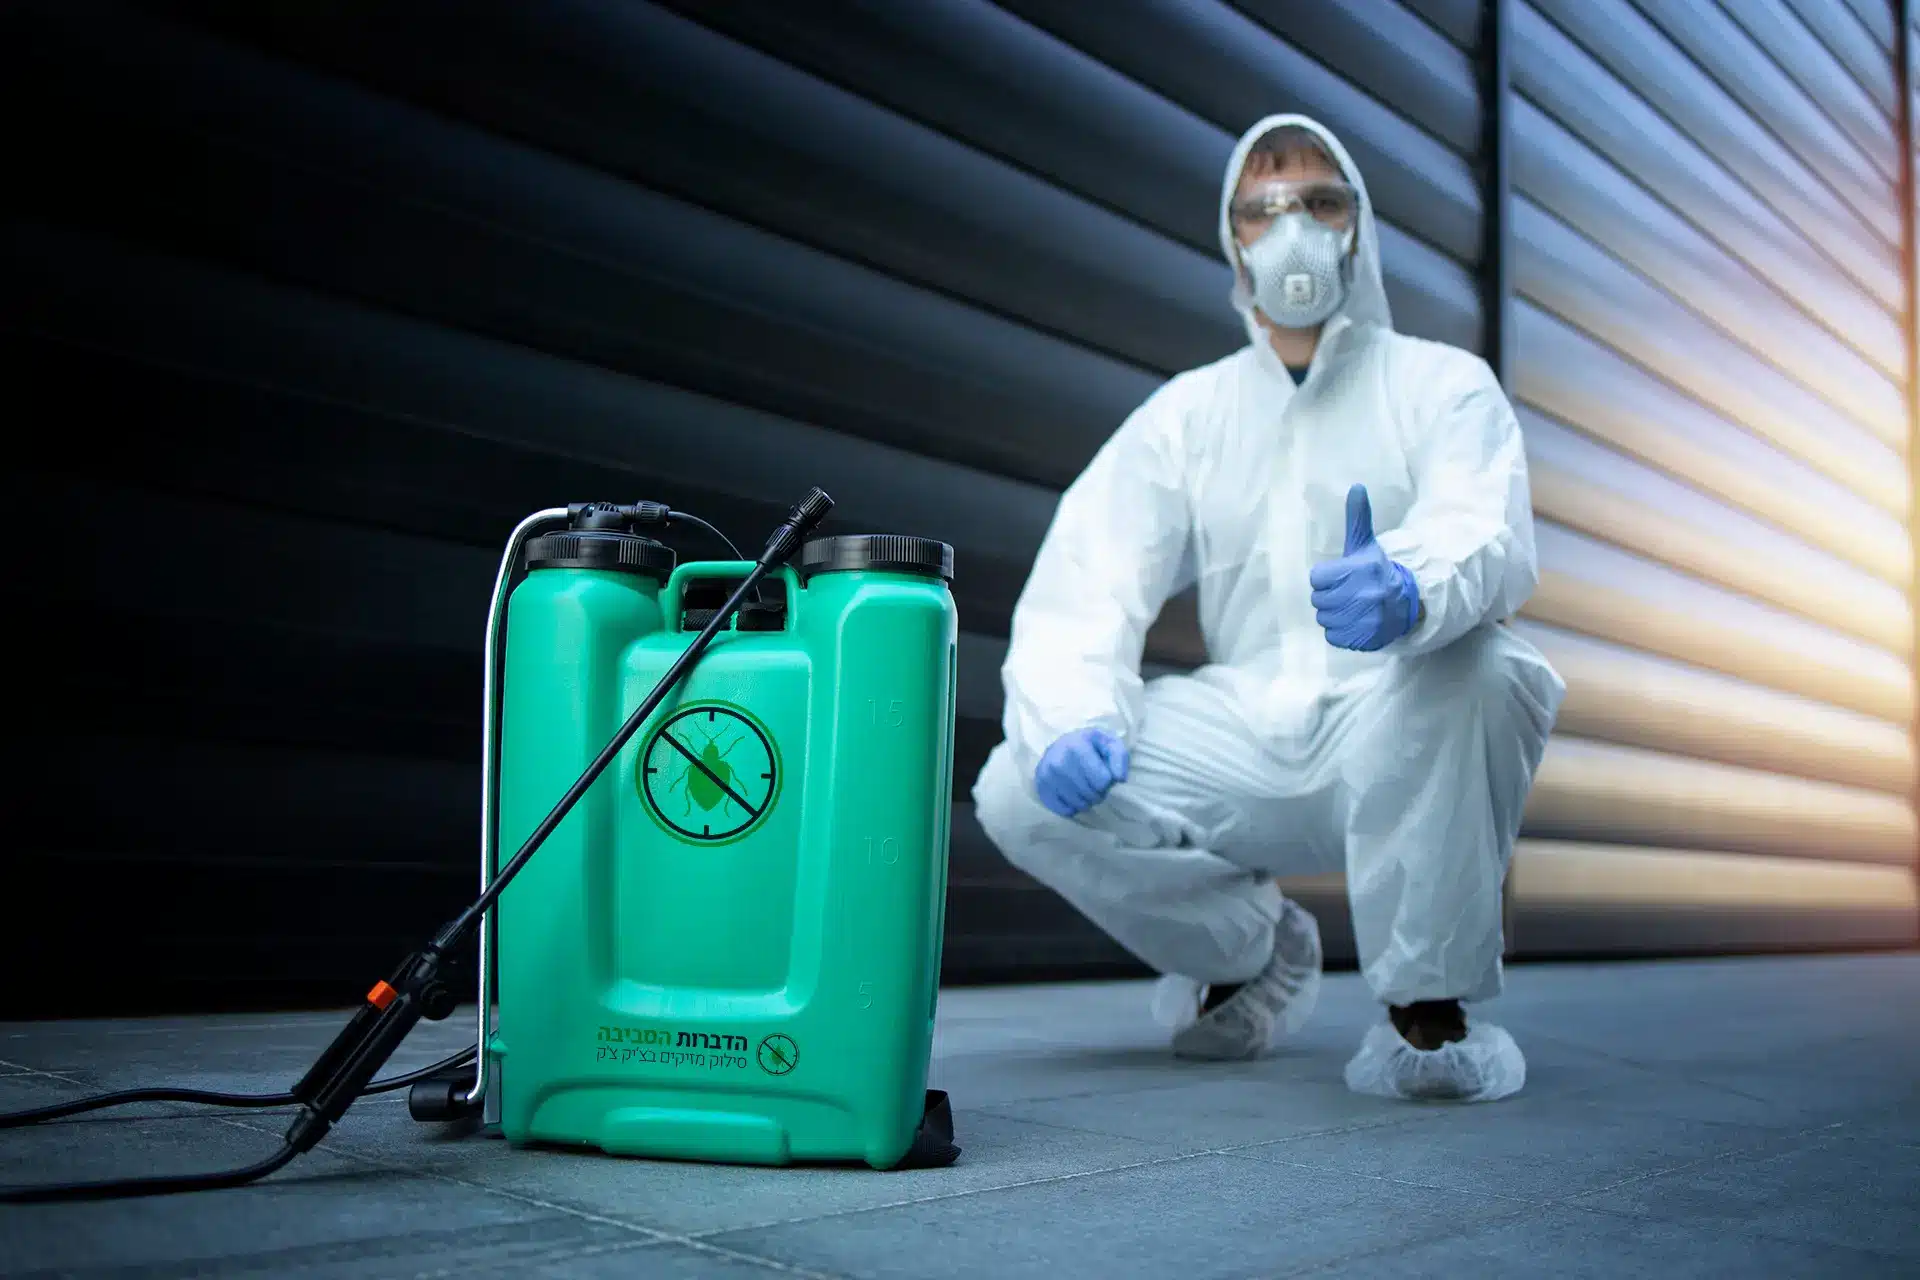 Man spraying pest control solution to address and manage a pest problem.